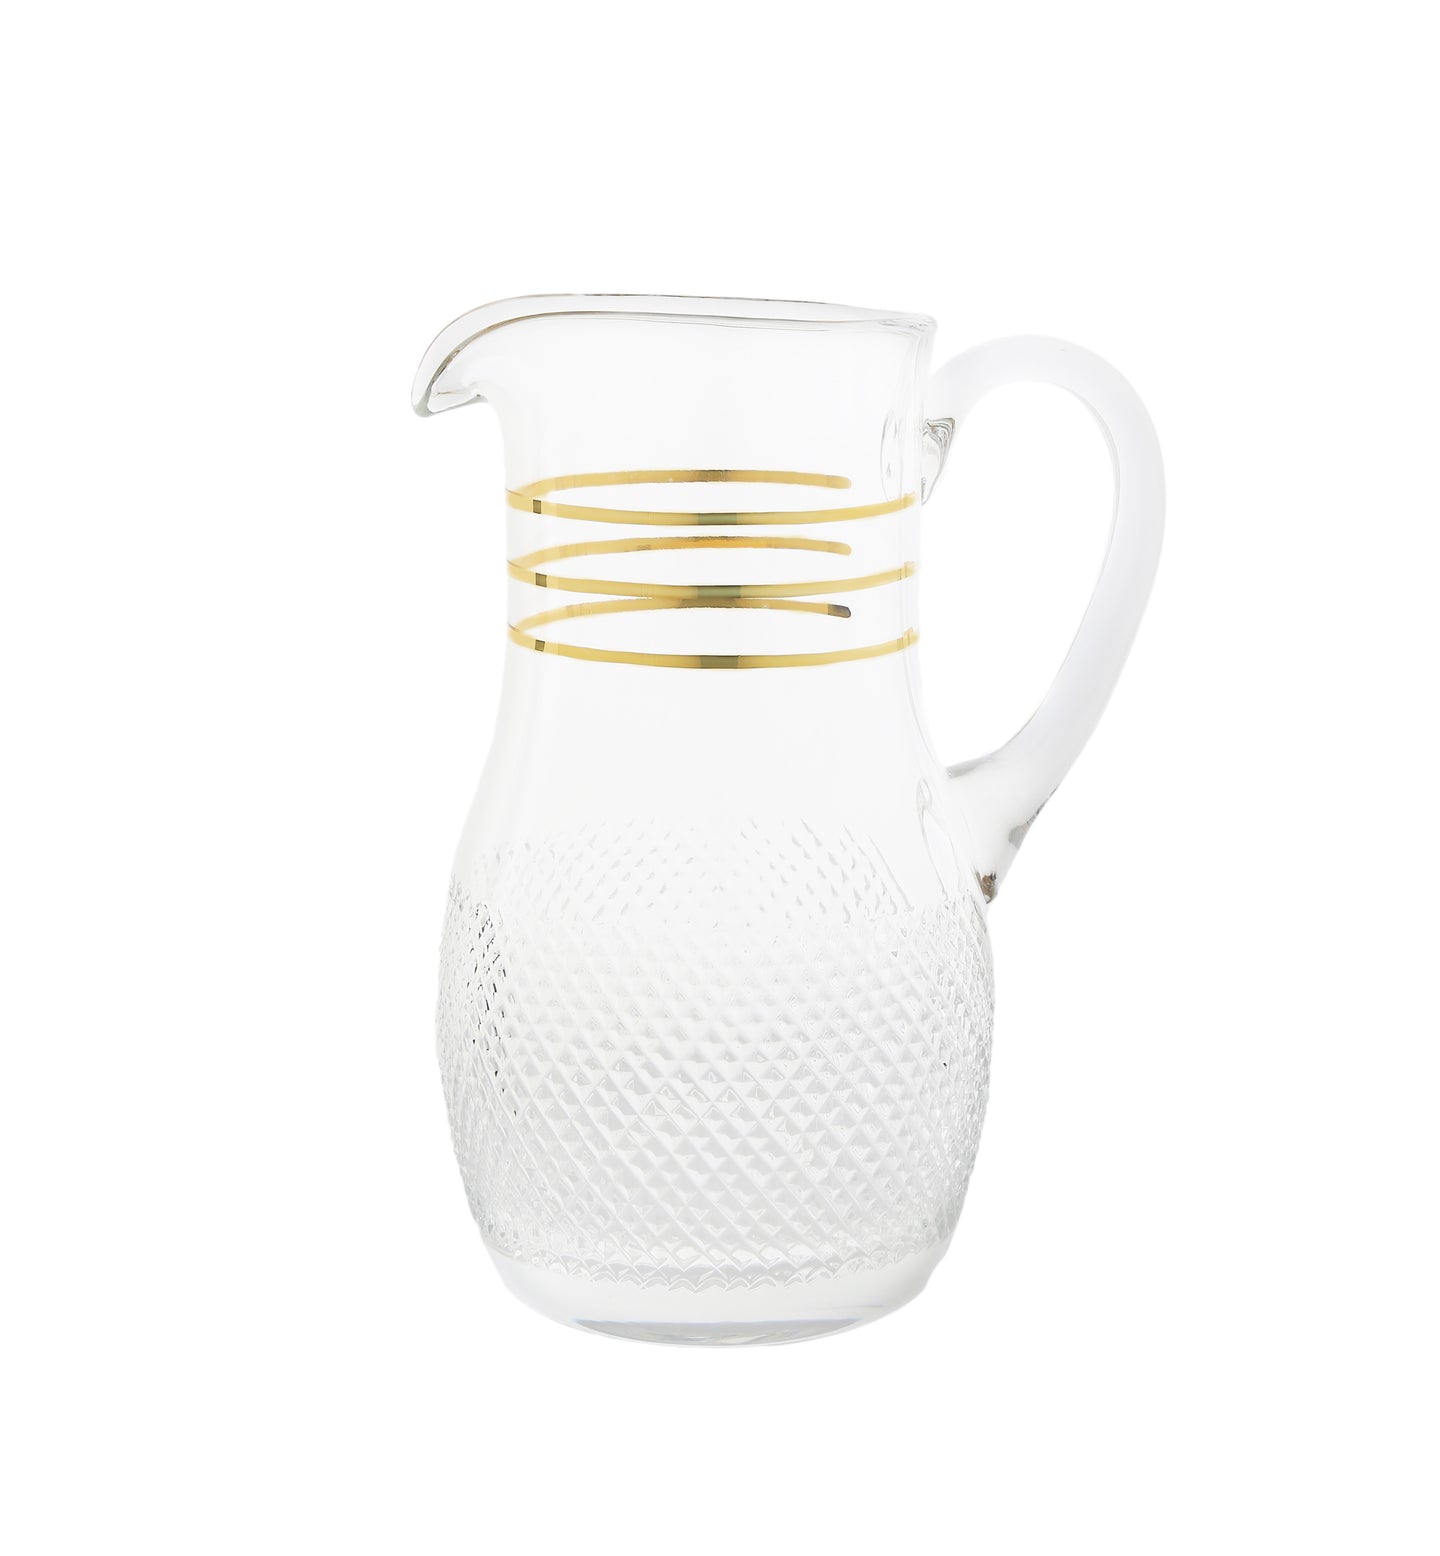 Glass Pitcher with Crystal Cut Design